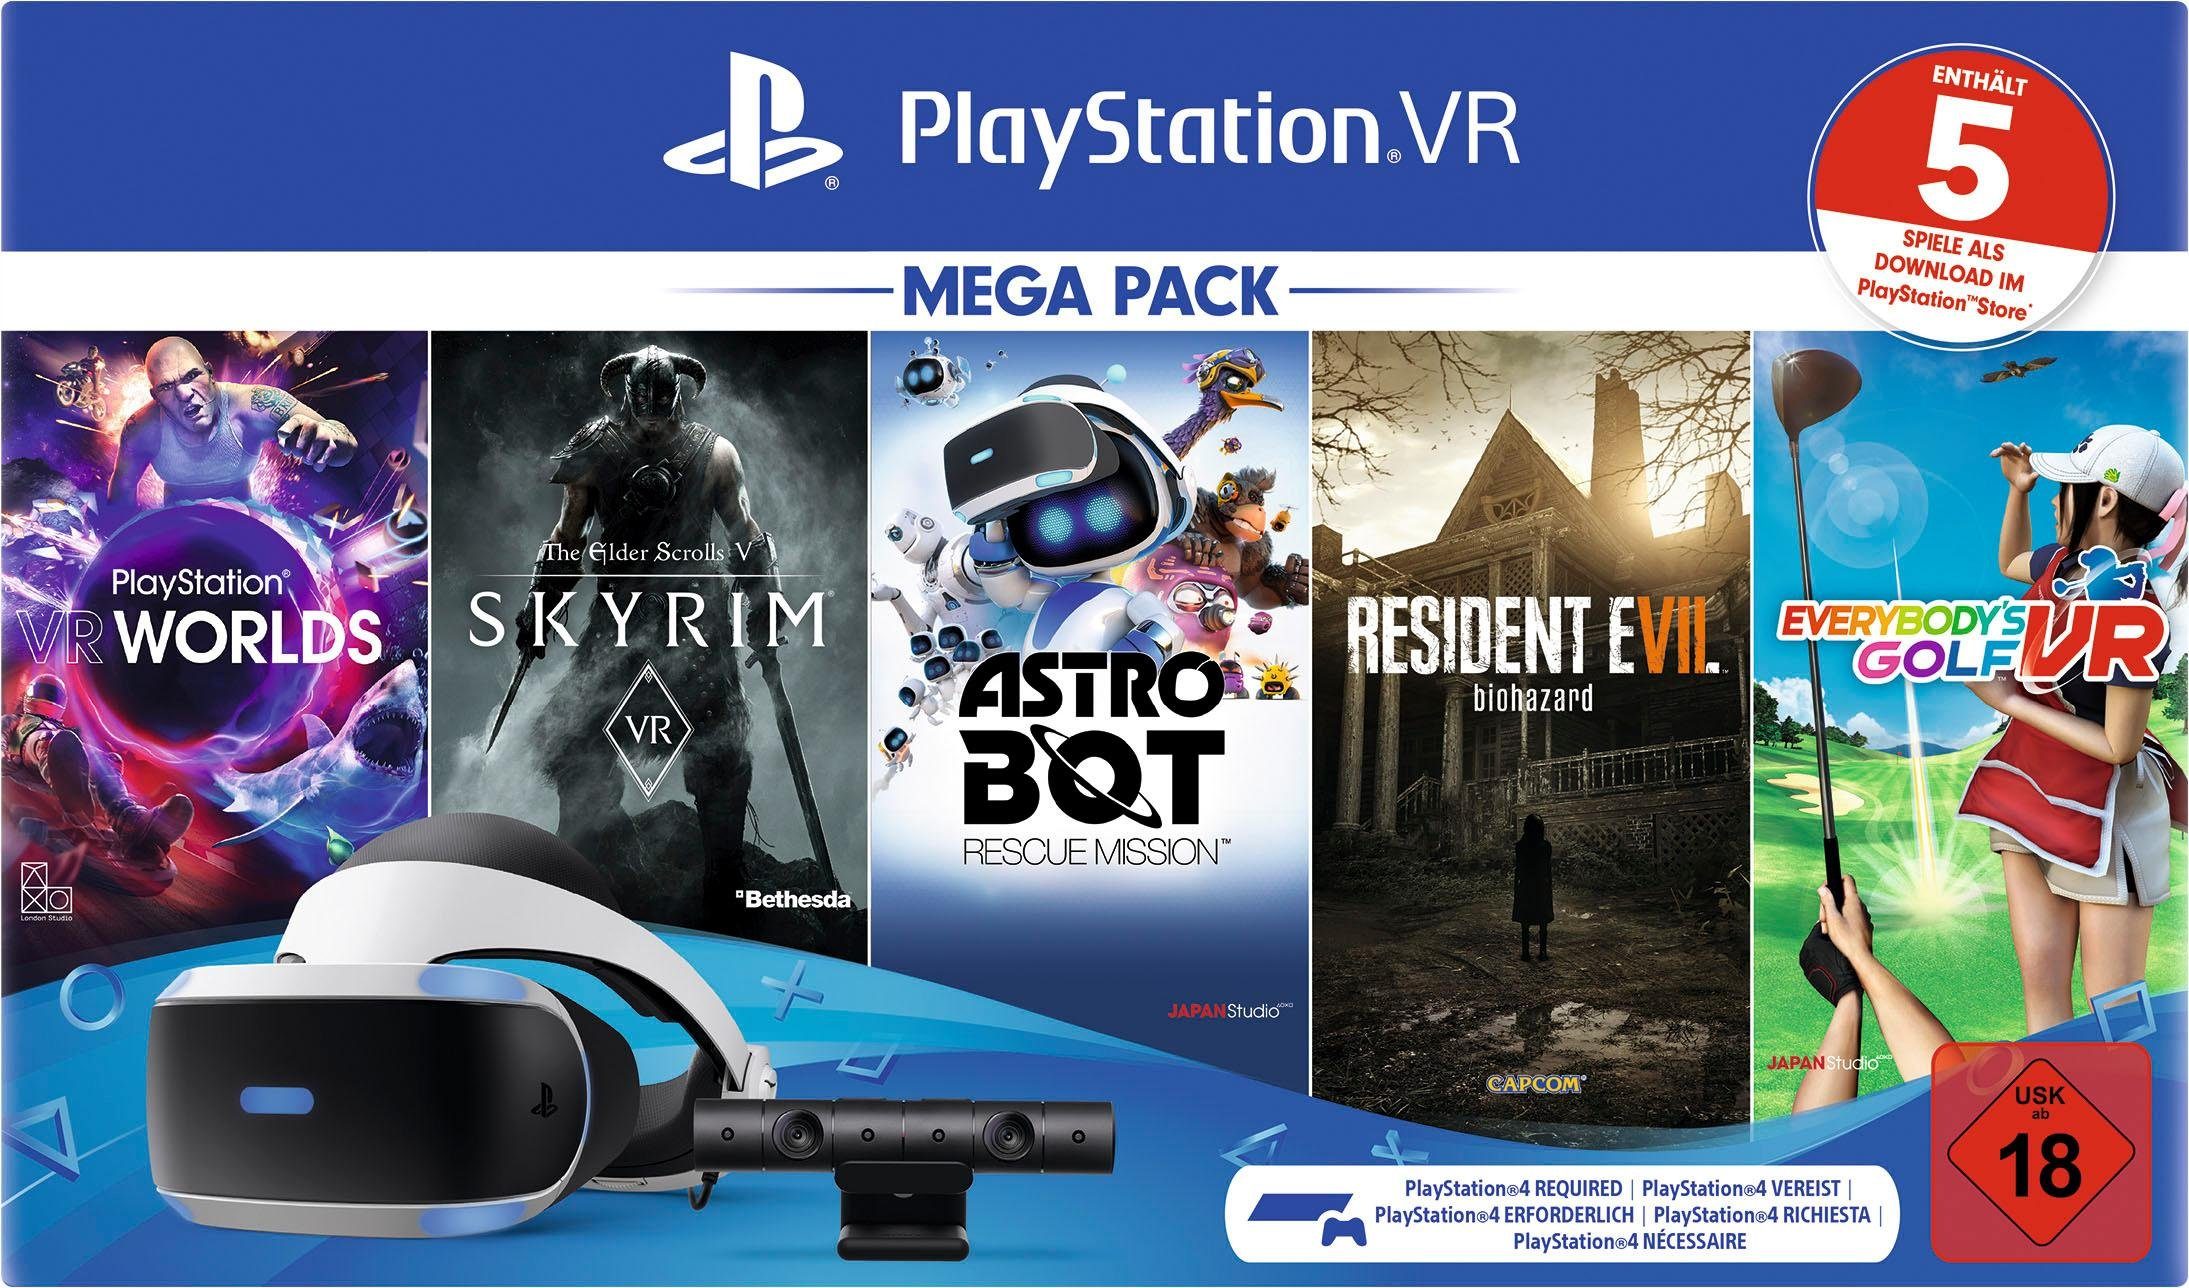 playstation 4 vr, PlayStation VR Pack 2 VR + 5 Spiele) - VR-Brille |  Alza.at - theartssociety-osnabrueck.de